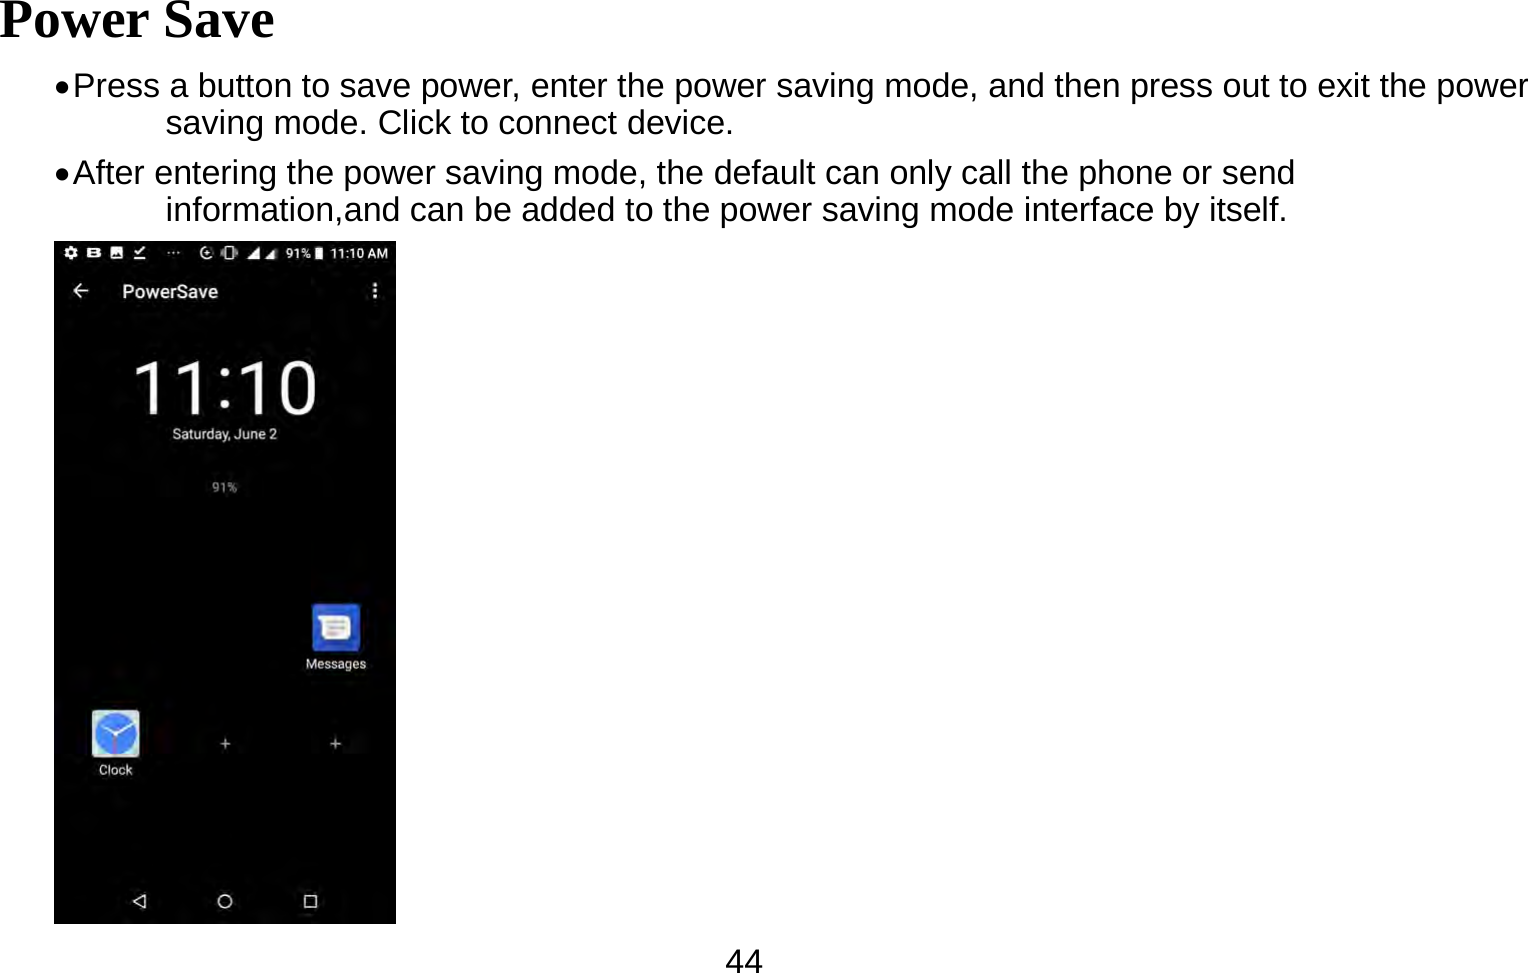   44Power Save  Press a button to save power, enter the power saving mode, and then press out to exit the power saving mode. Click to connect device.  After entering the power saving mode, the default can only call the phone or send   information,and can be added to the power saving mode interface by itself.      